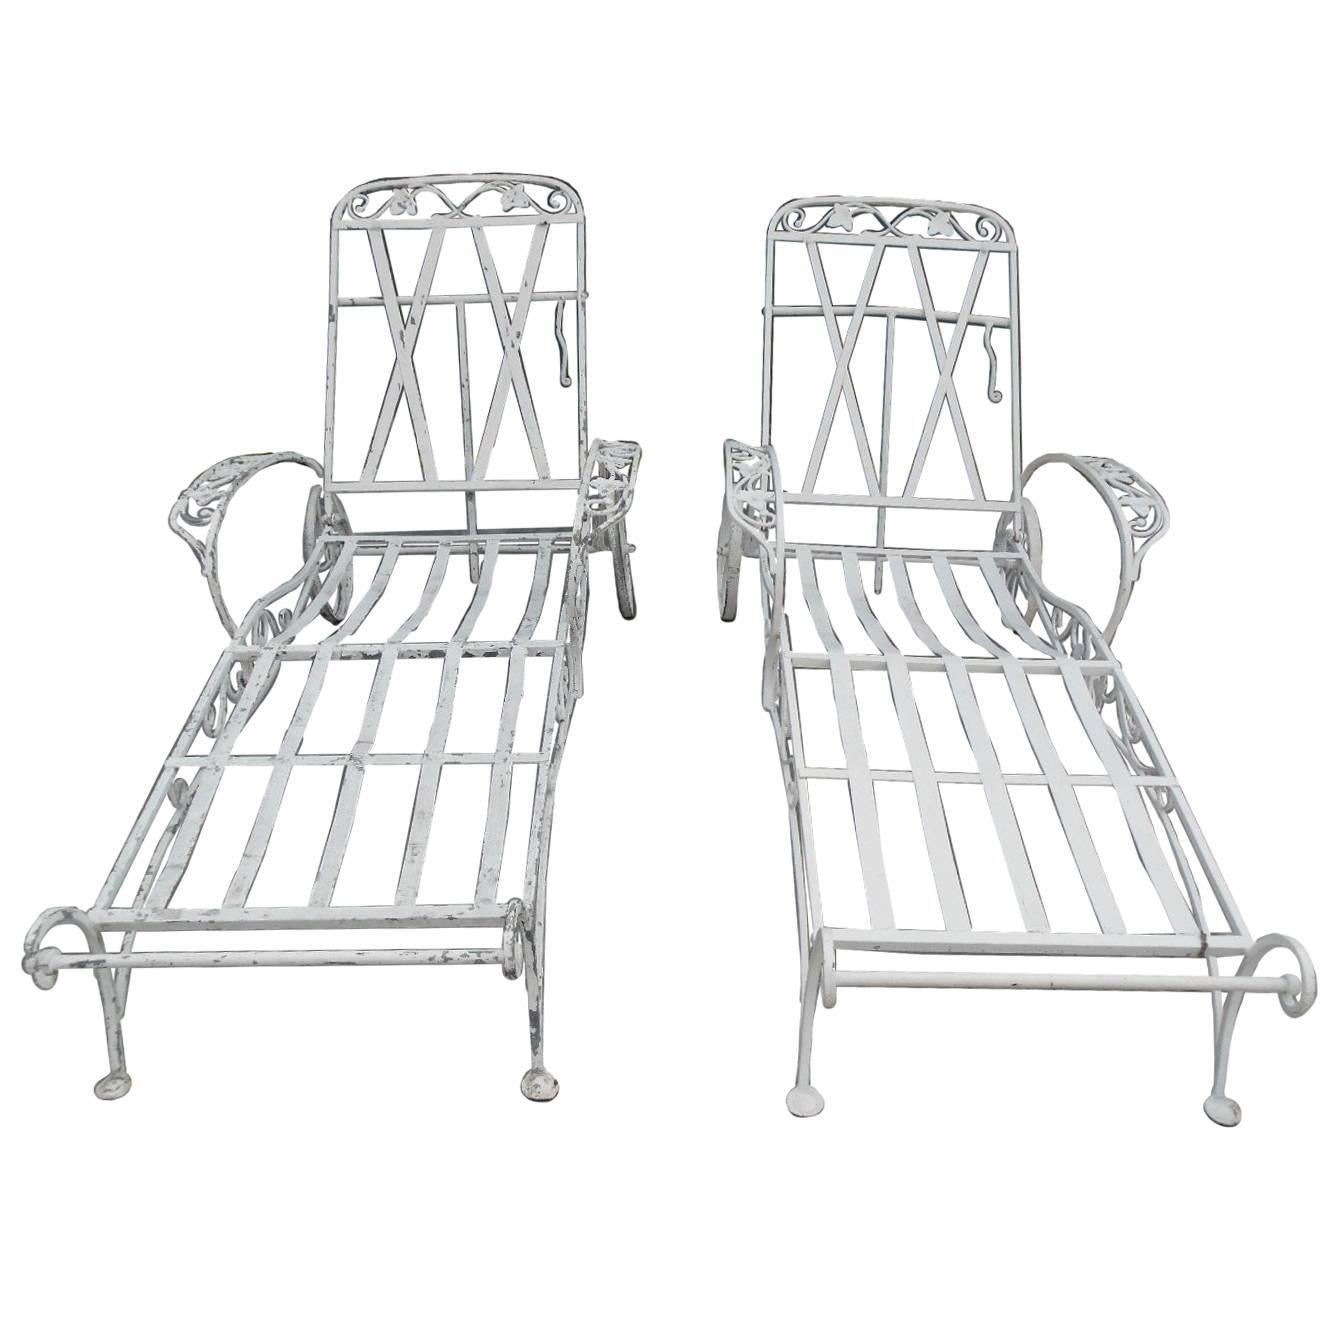 Salterini Chaise Lounges, Mt Vernon Pattern in Wrought Iron, Four available